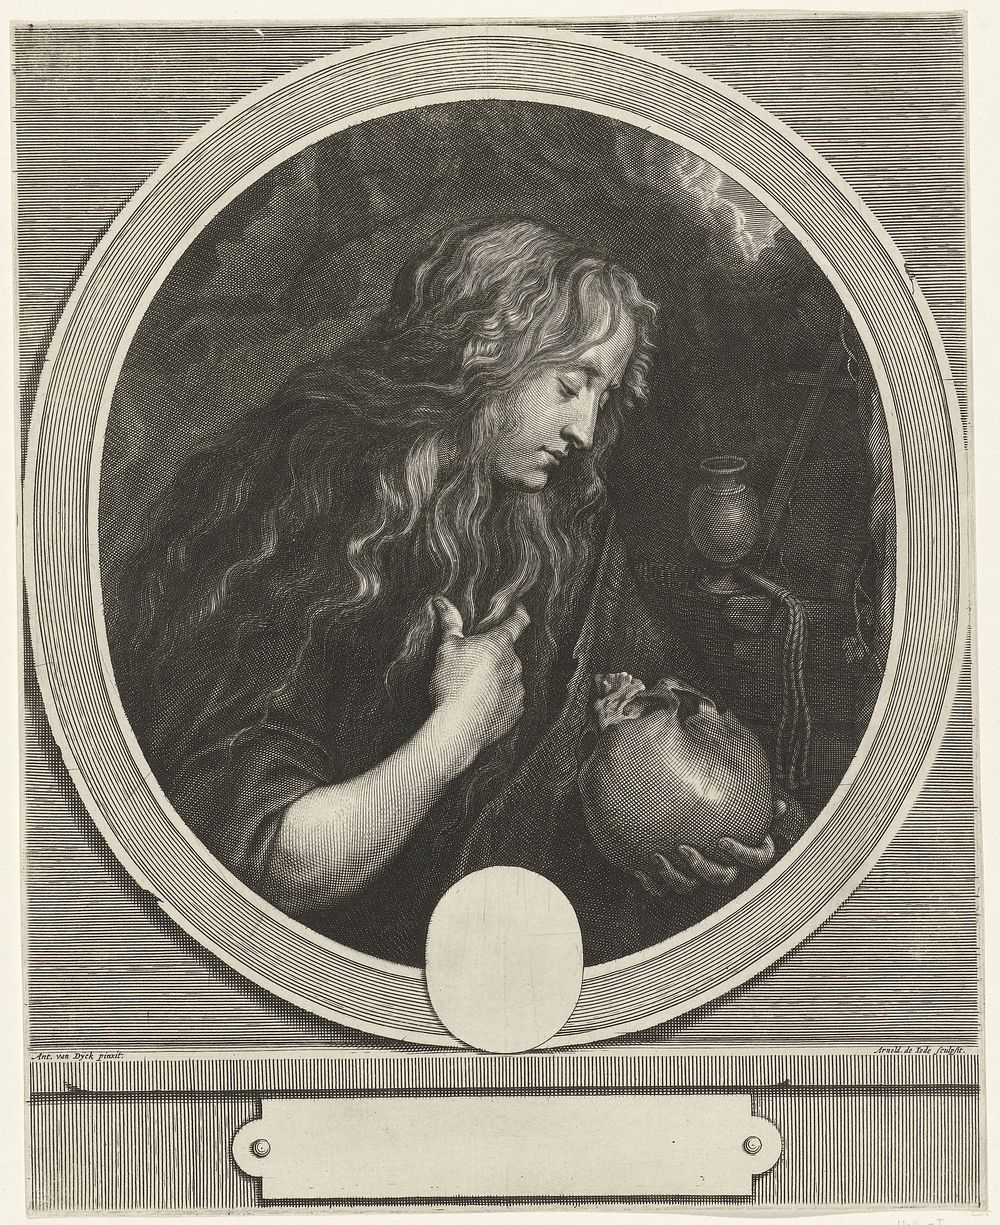 Maria Magdalena met schedel (1666 - in or before 1669) by Arnold de Jode and Anthony van Dyck